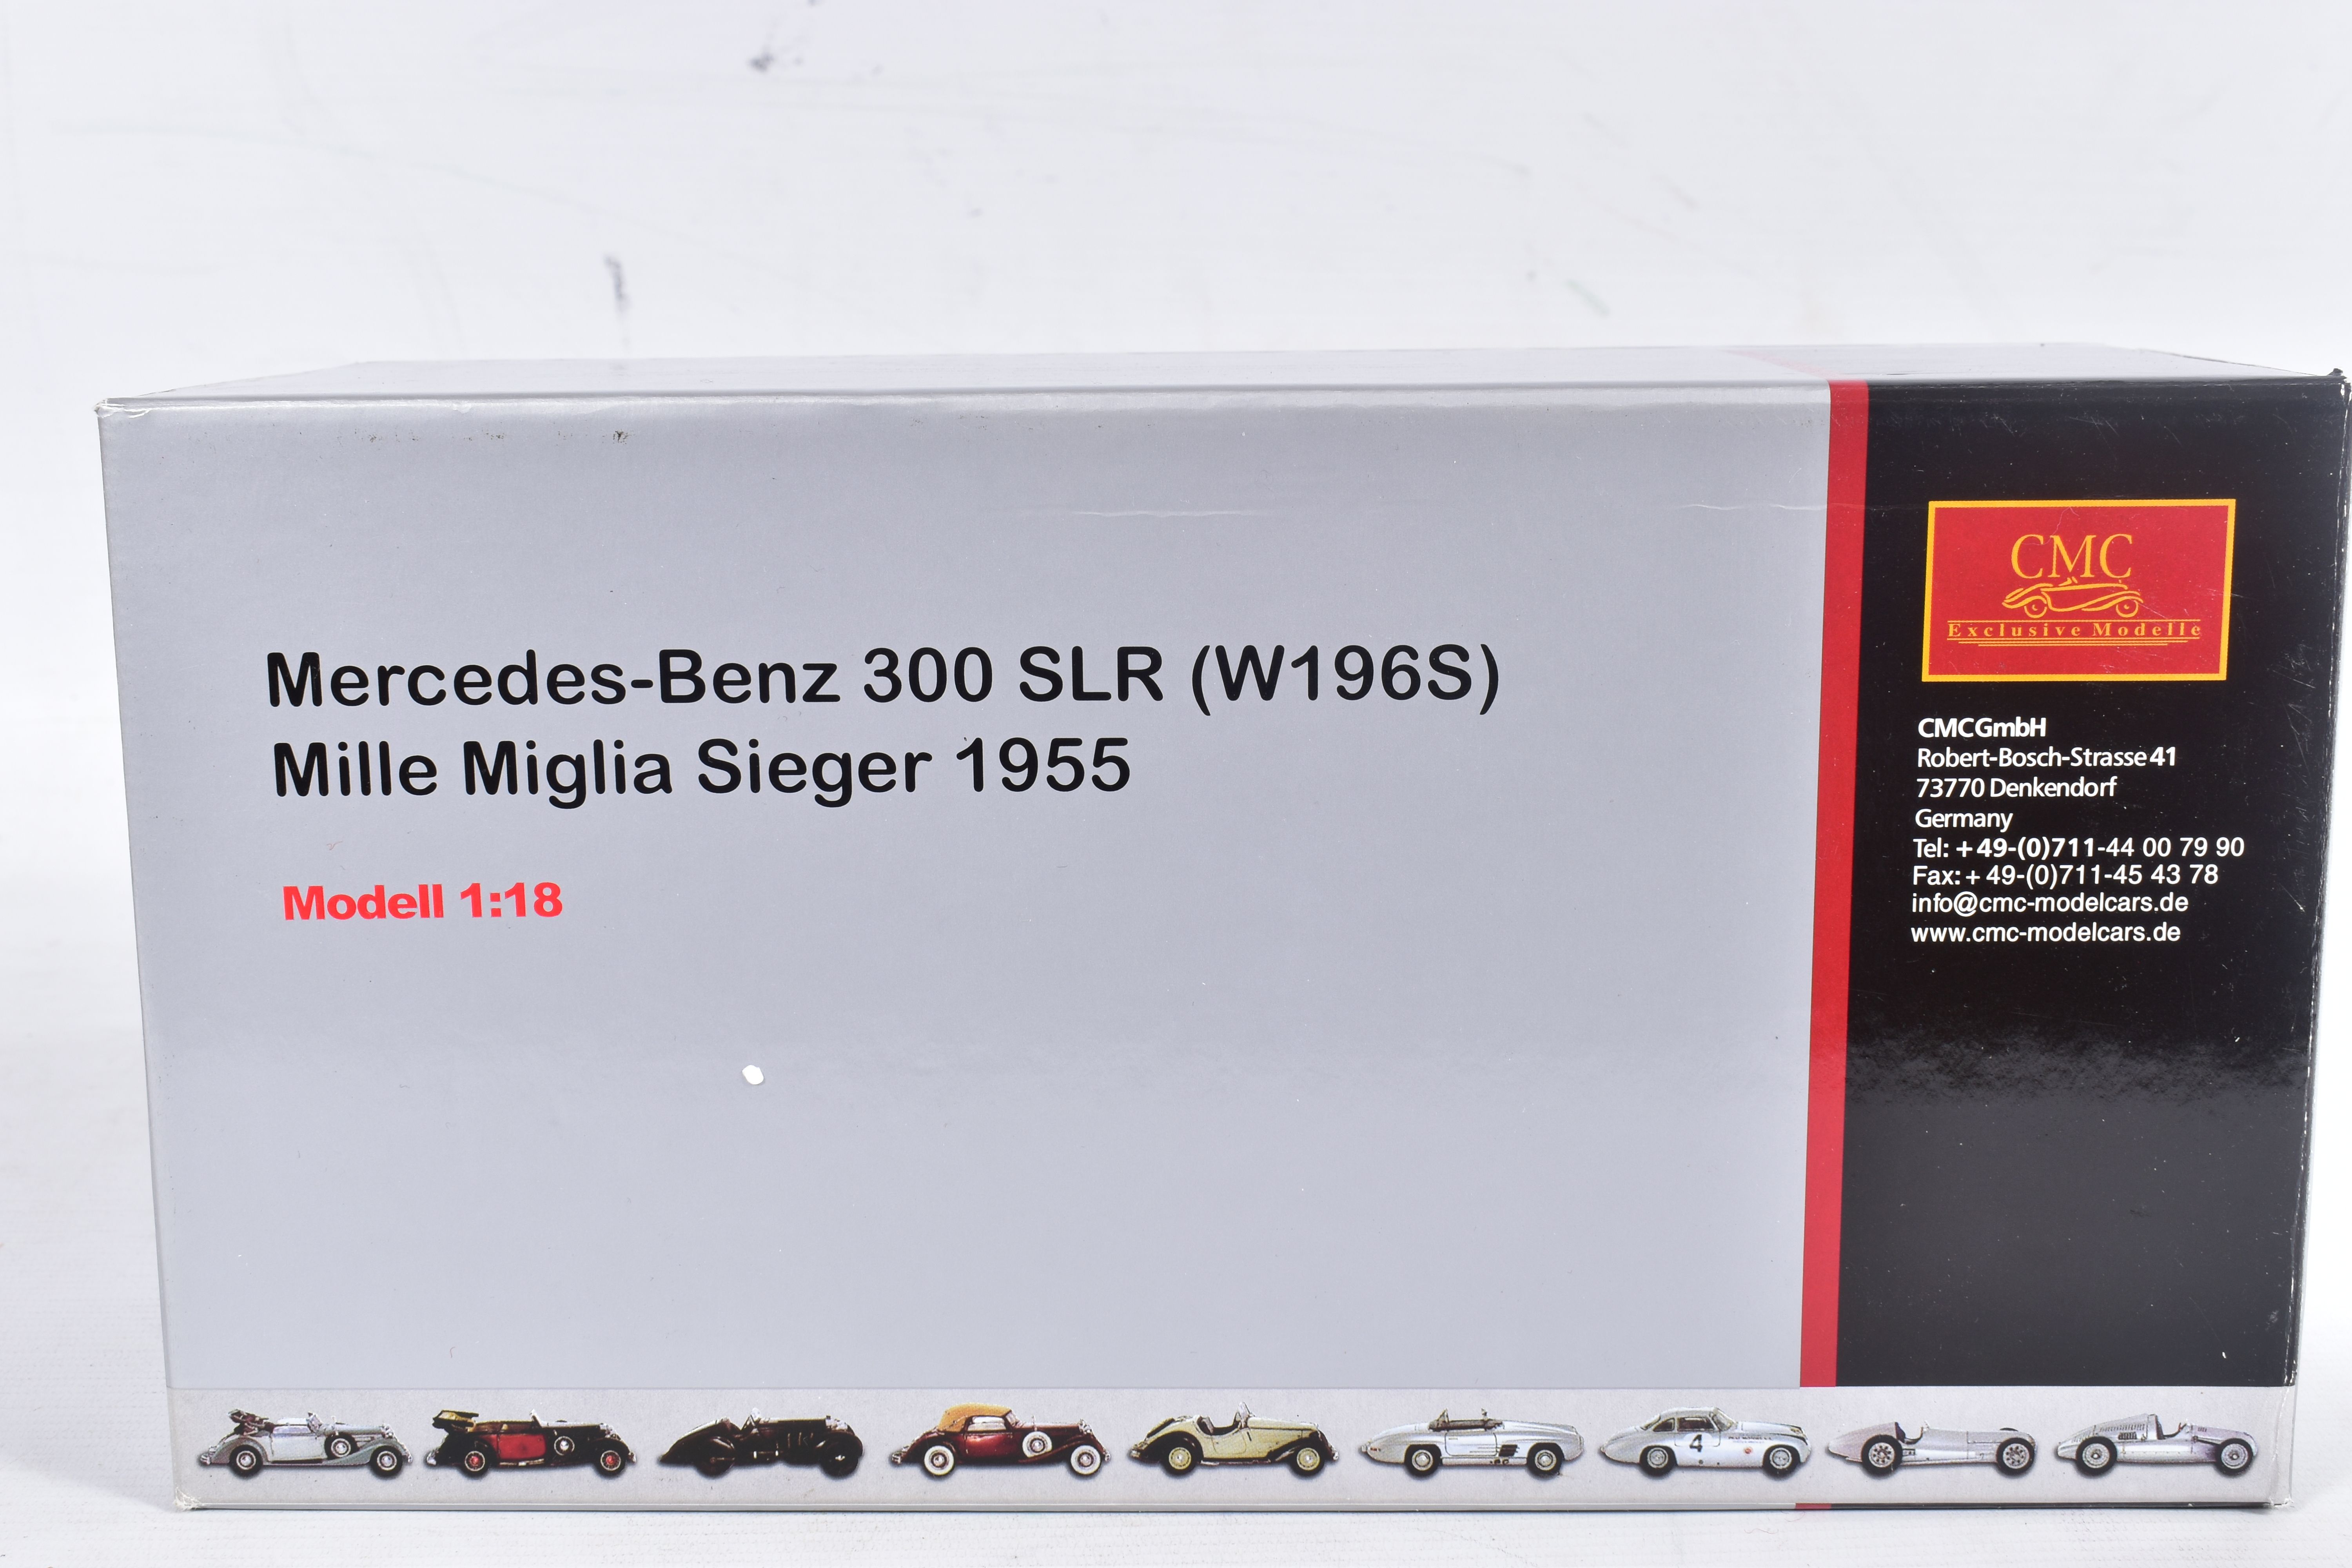 A BOXED CMC 1/18 SCALE MERCEDES-BENZ 300 SLR (W196S) MILLE MIGLIA WINNER 1955, No.M-066, complete - Image 7 of 8